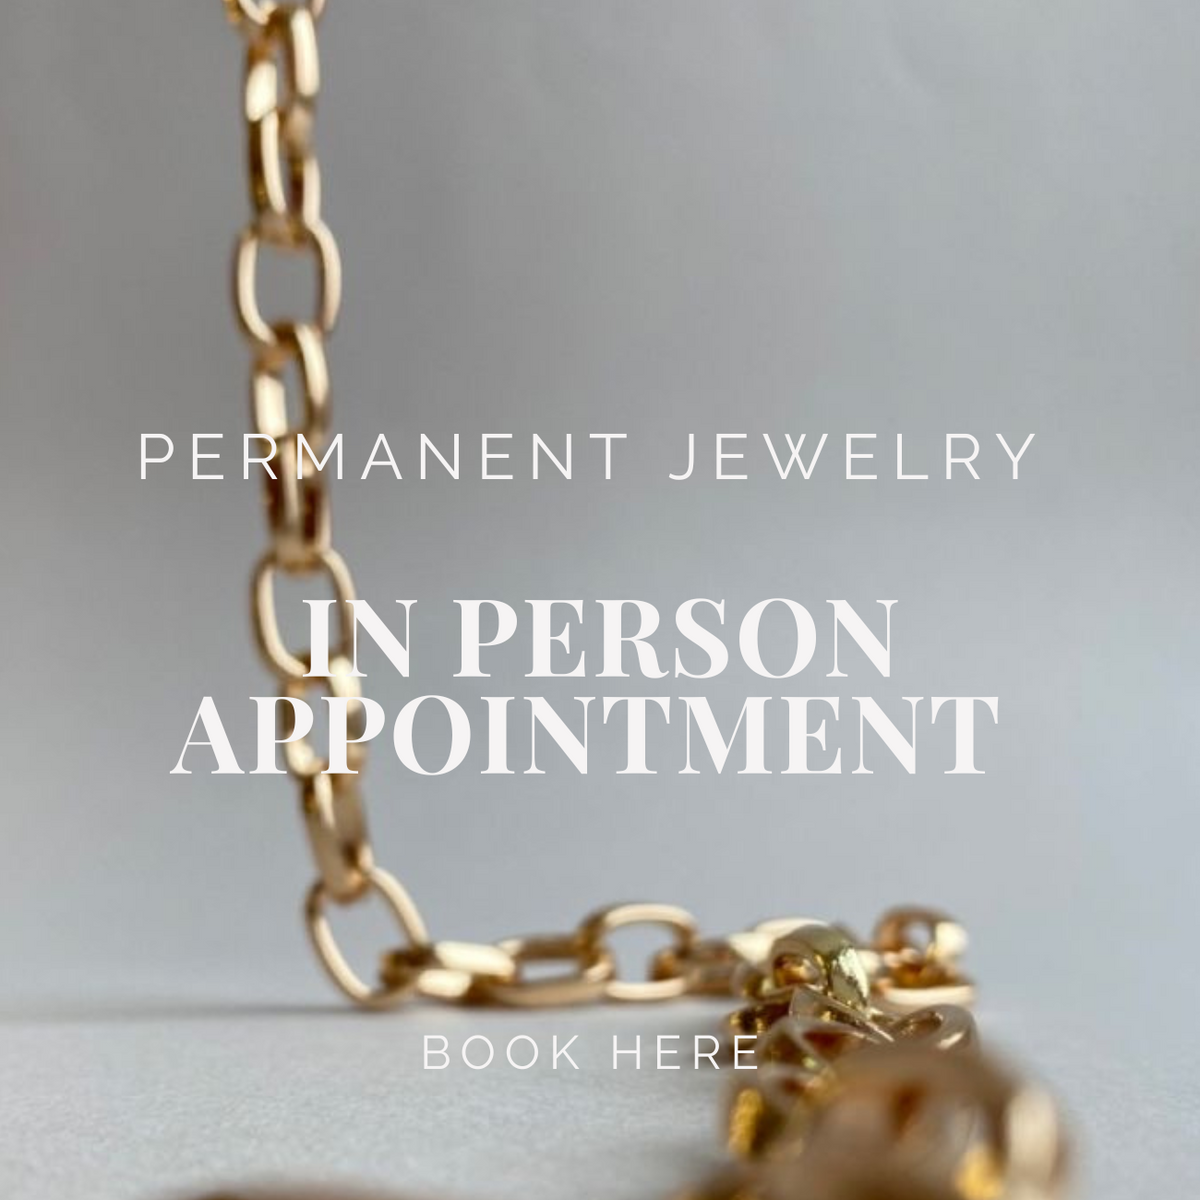 One Permanent Jewelry Appointment